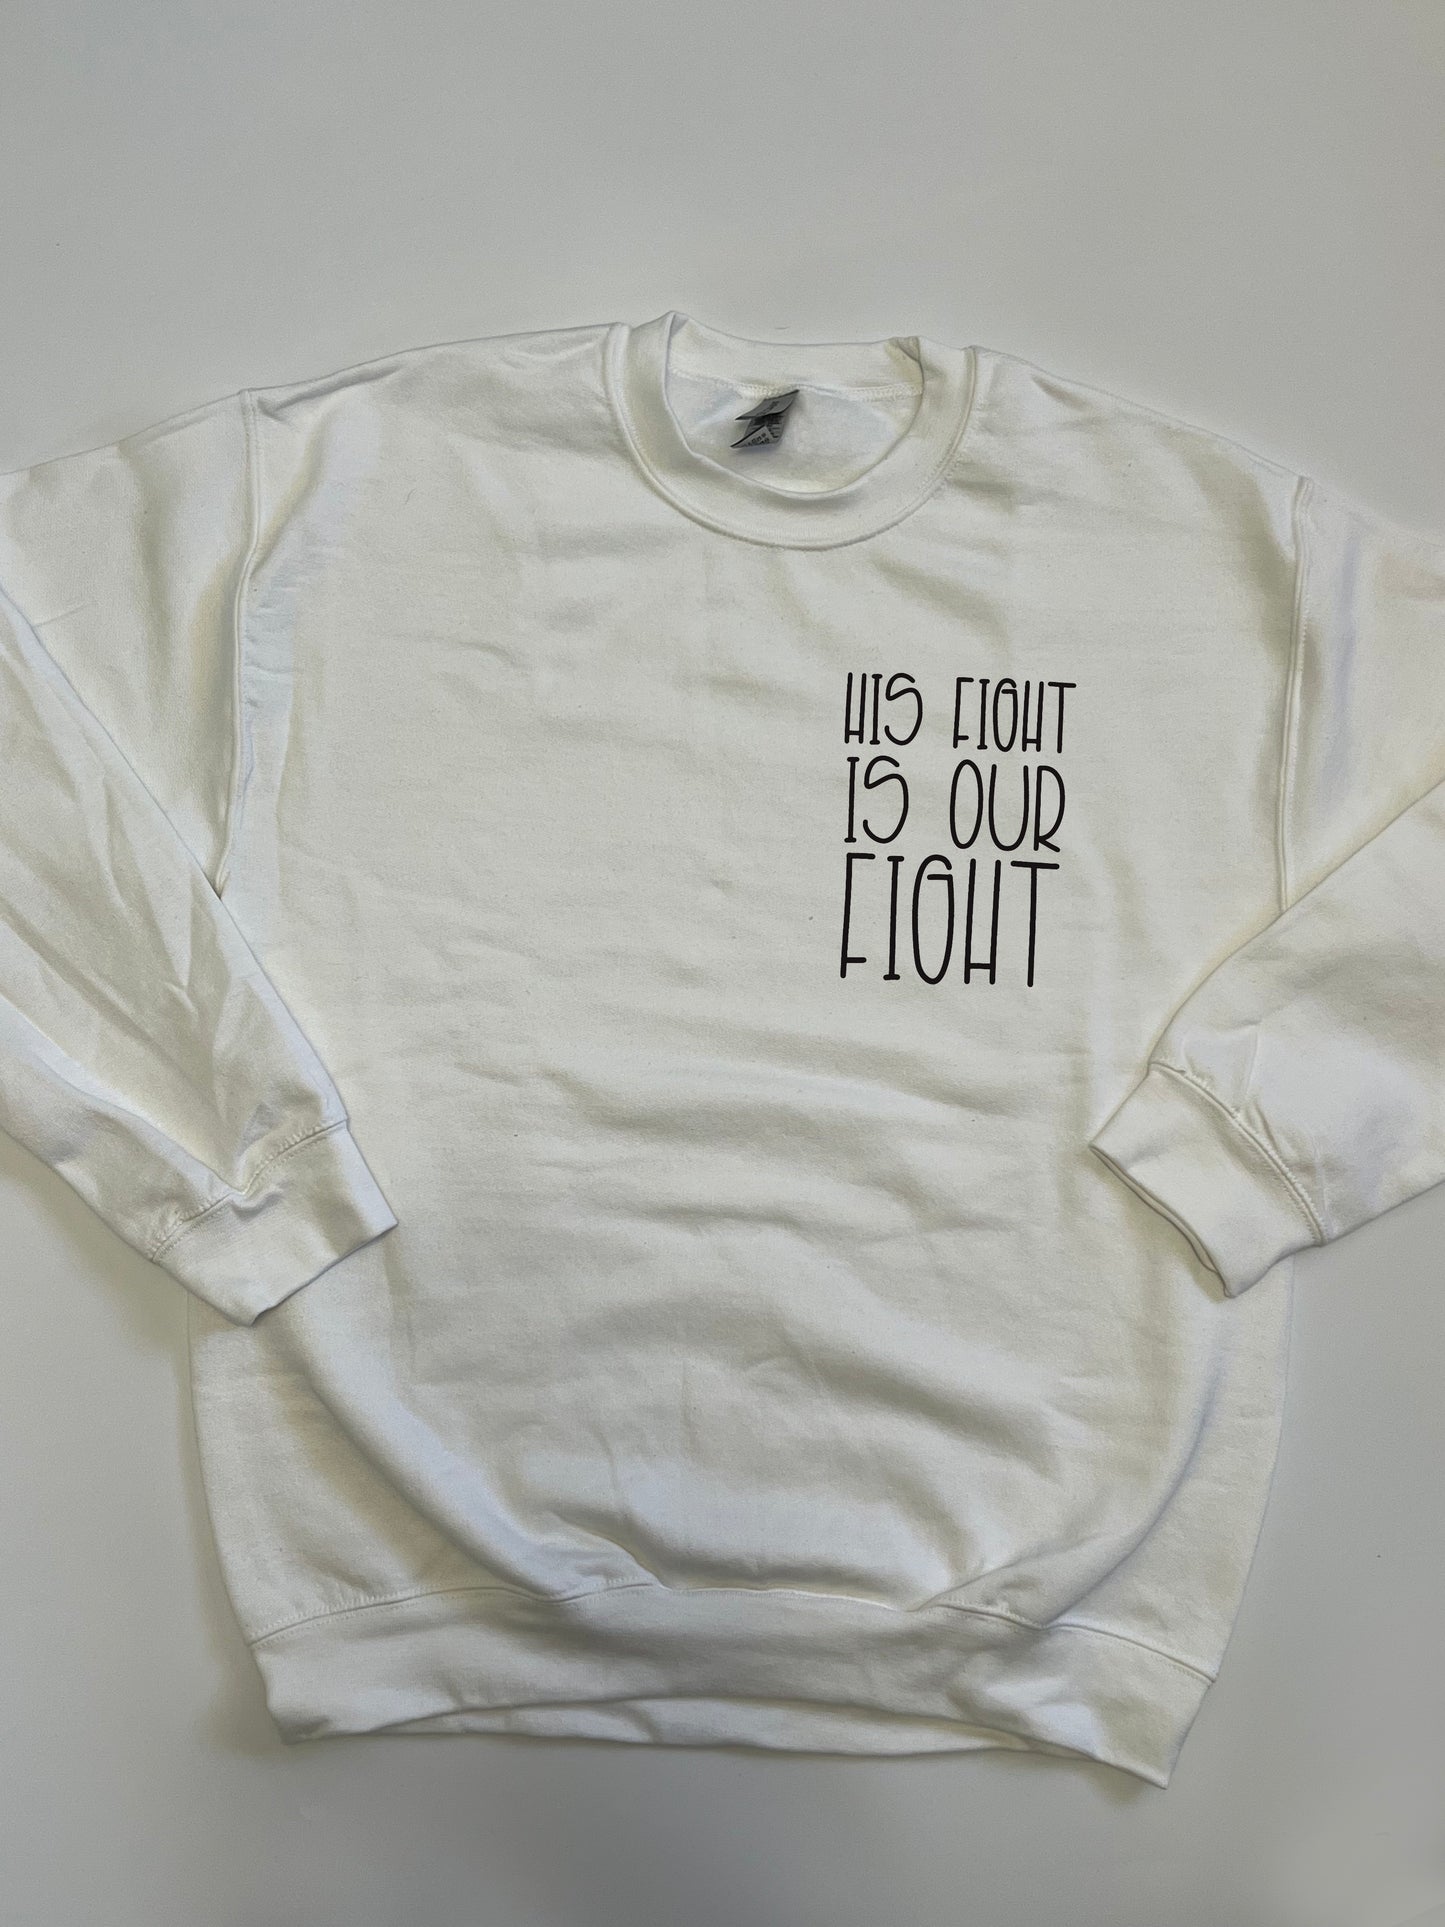 ADULT. HOODIE. OUR FIGHT. PREORDER.